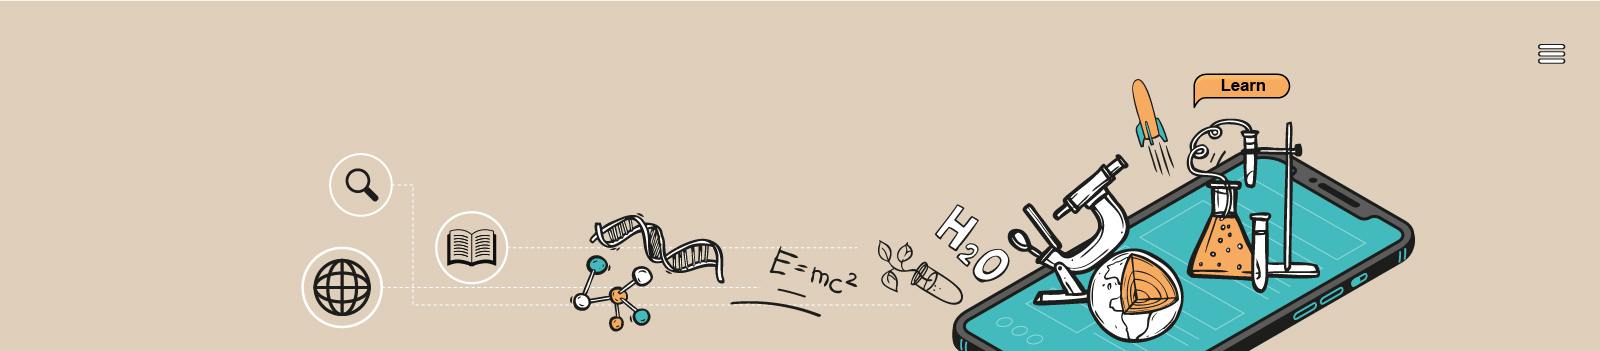 Ready Steady Science_Web Banner